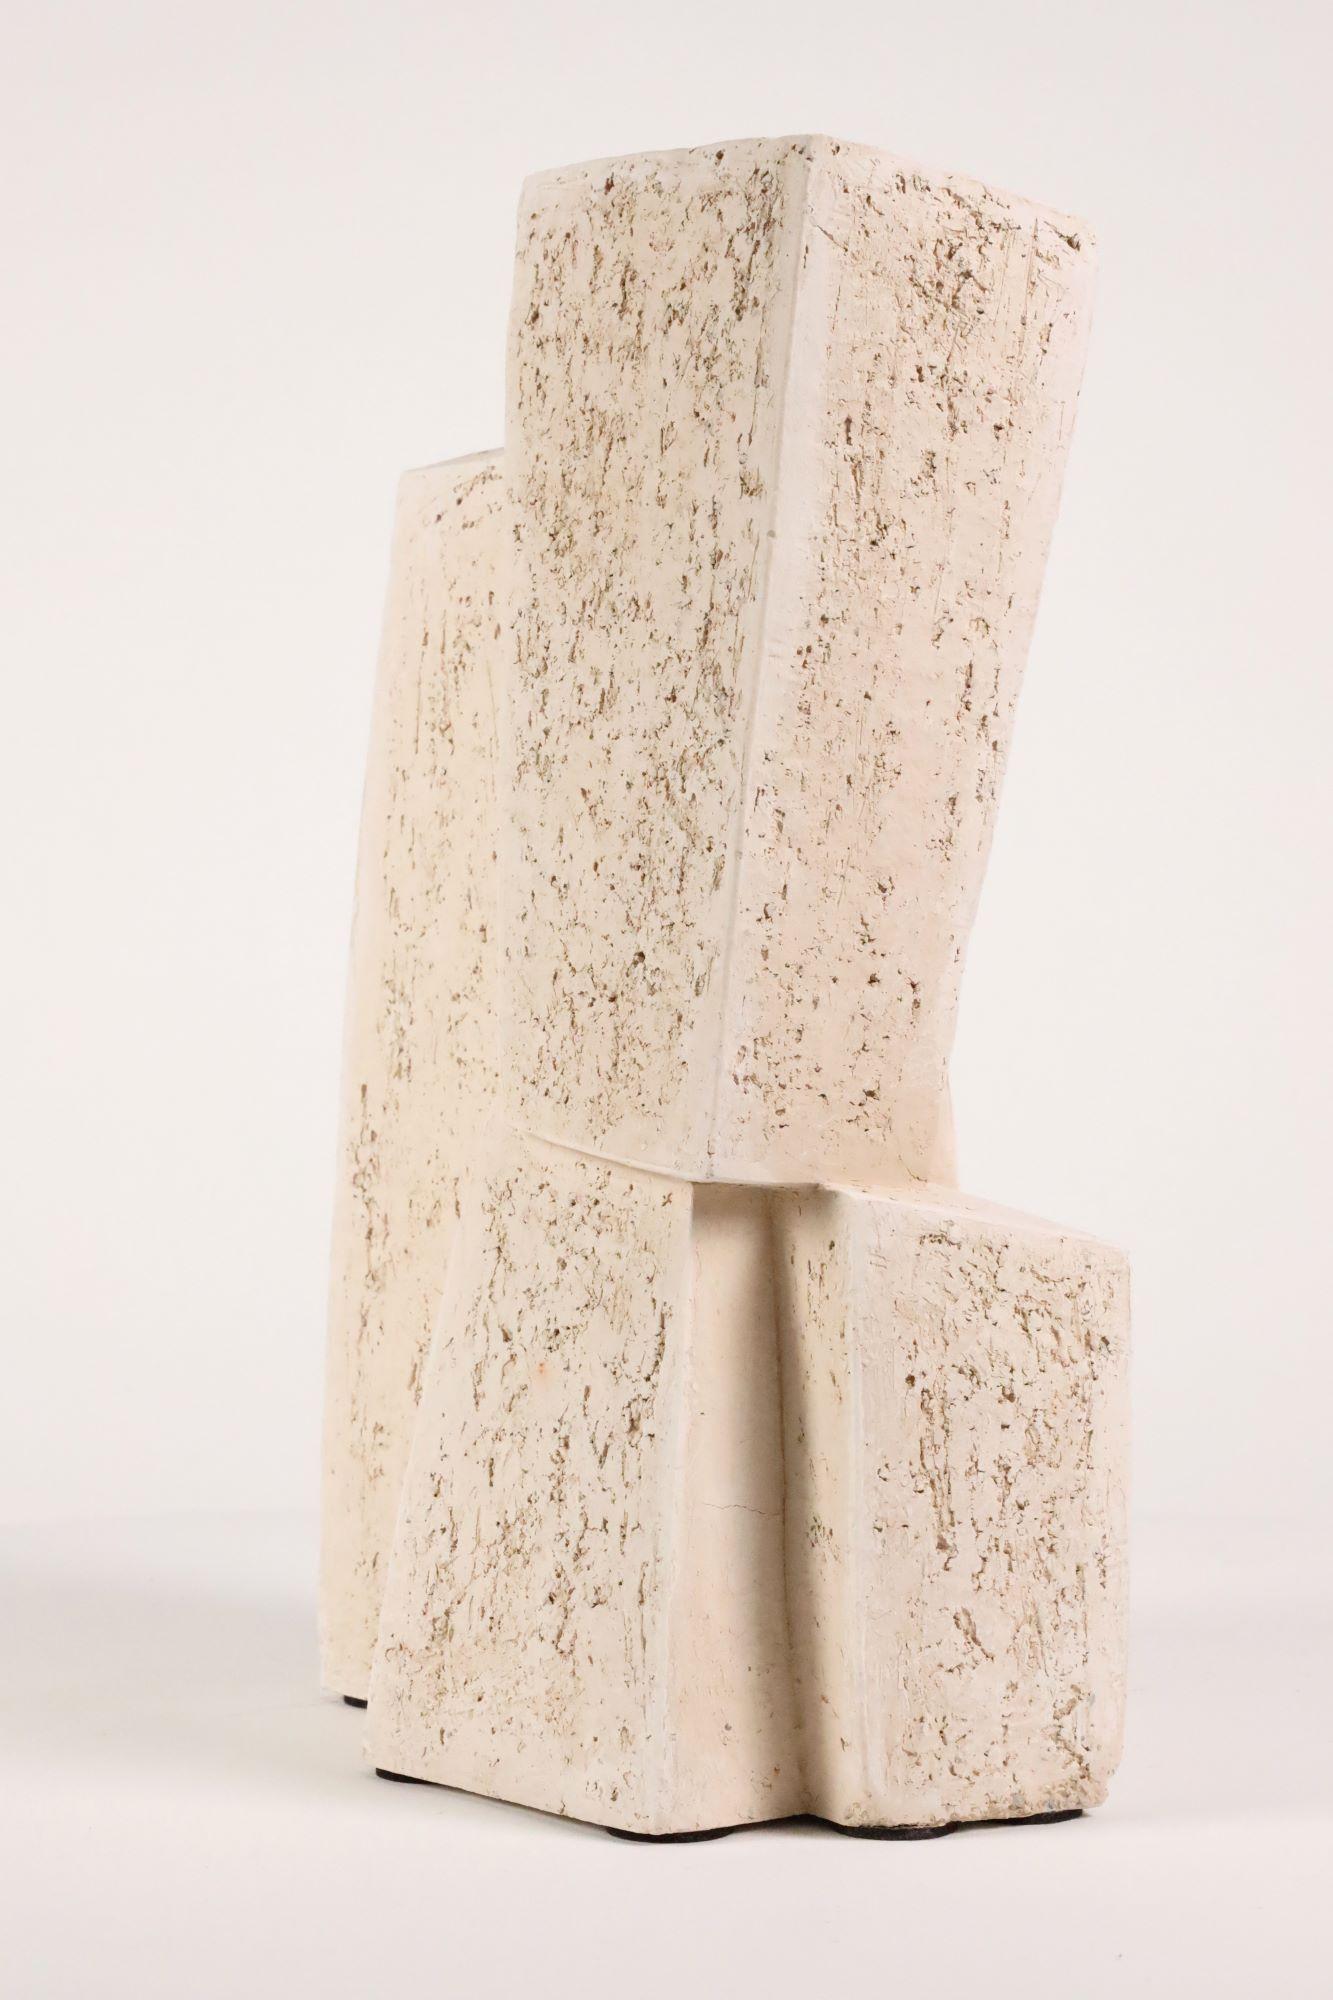 Union V by Delphine Brabant - Abstract geometric sculpture, terracotta, white For Sale 7